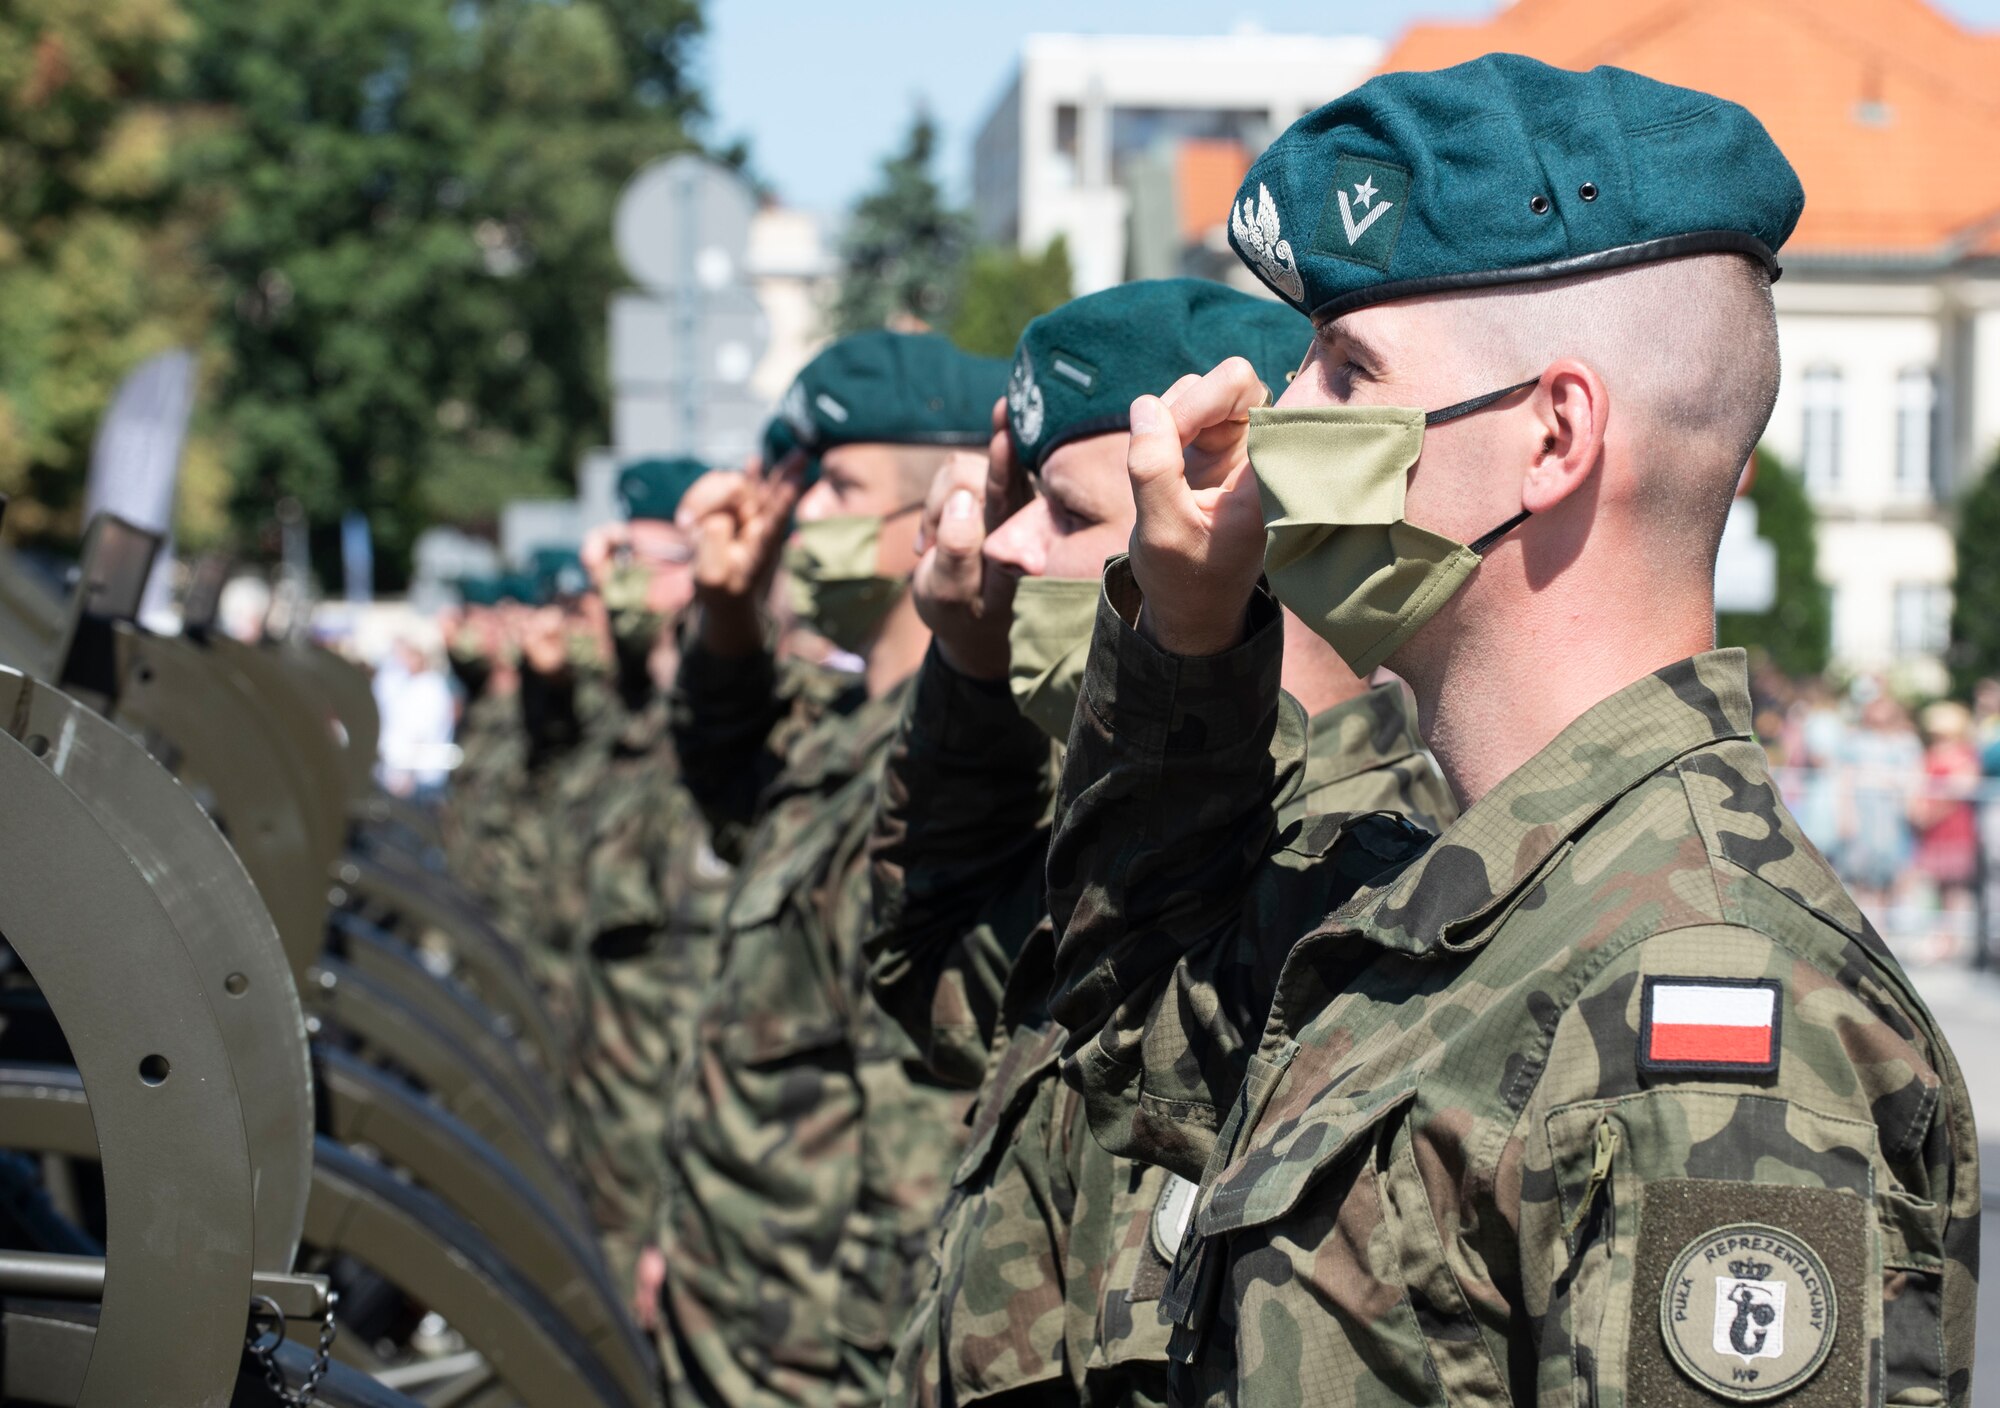 Polish service members salute during the Polish national anthem at Warsaw, Poland, August 15, 2020. Poland commemorates the 100th anniversary of the Battle of Warsaw, a Polish victory in the Polish-Soviet War, during this year’s Polish Armed Forces Day. (U.S. Air Force photo by Senior Airman Melody W. Howley)